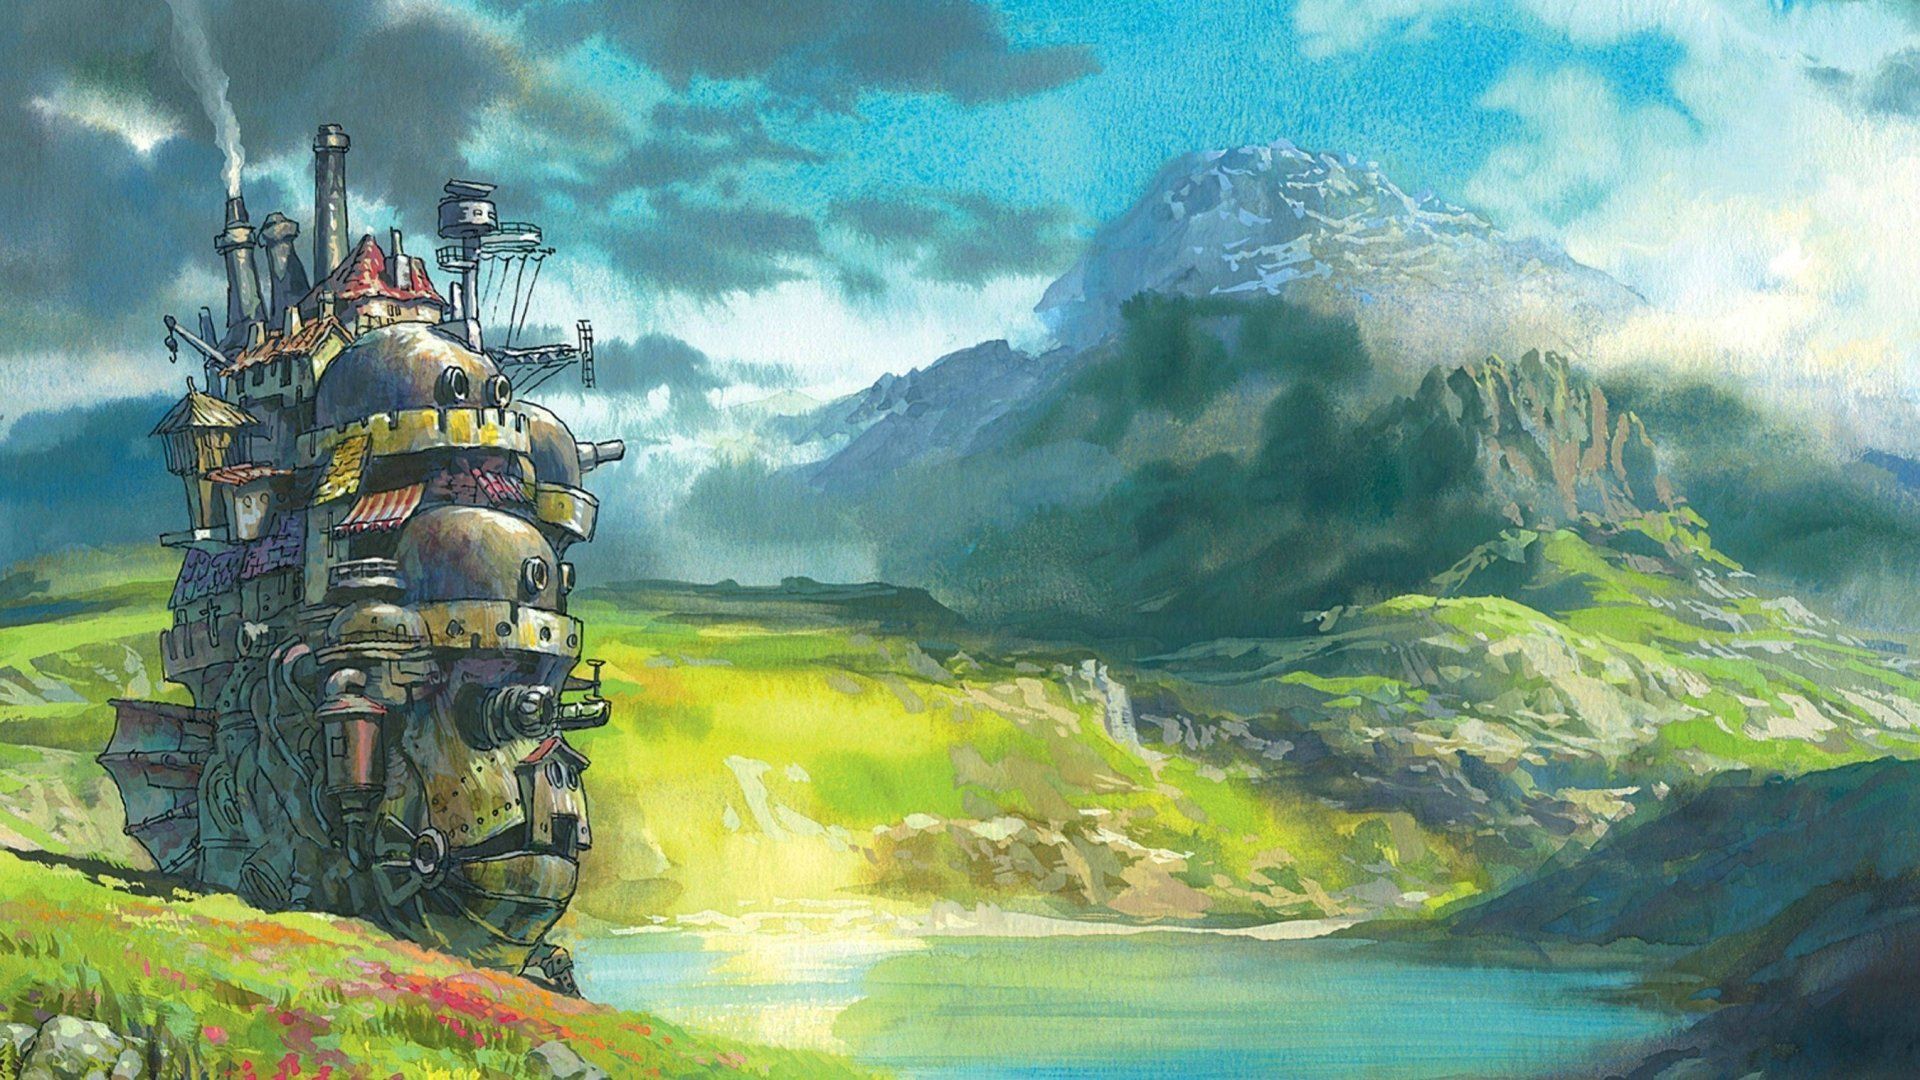 Anime Howls Moving Castle Wallpaper Free Anime Howls Moving